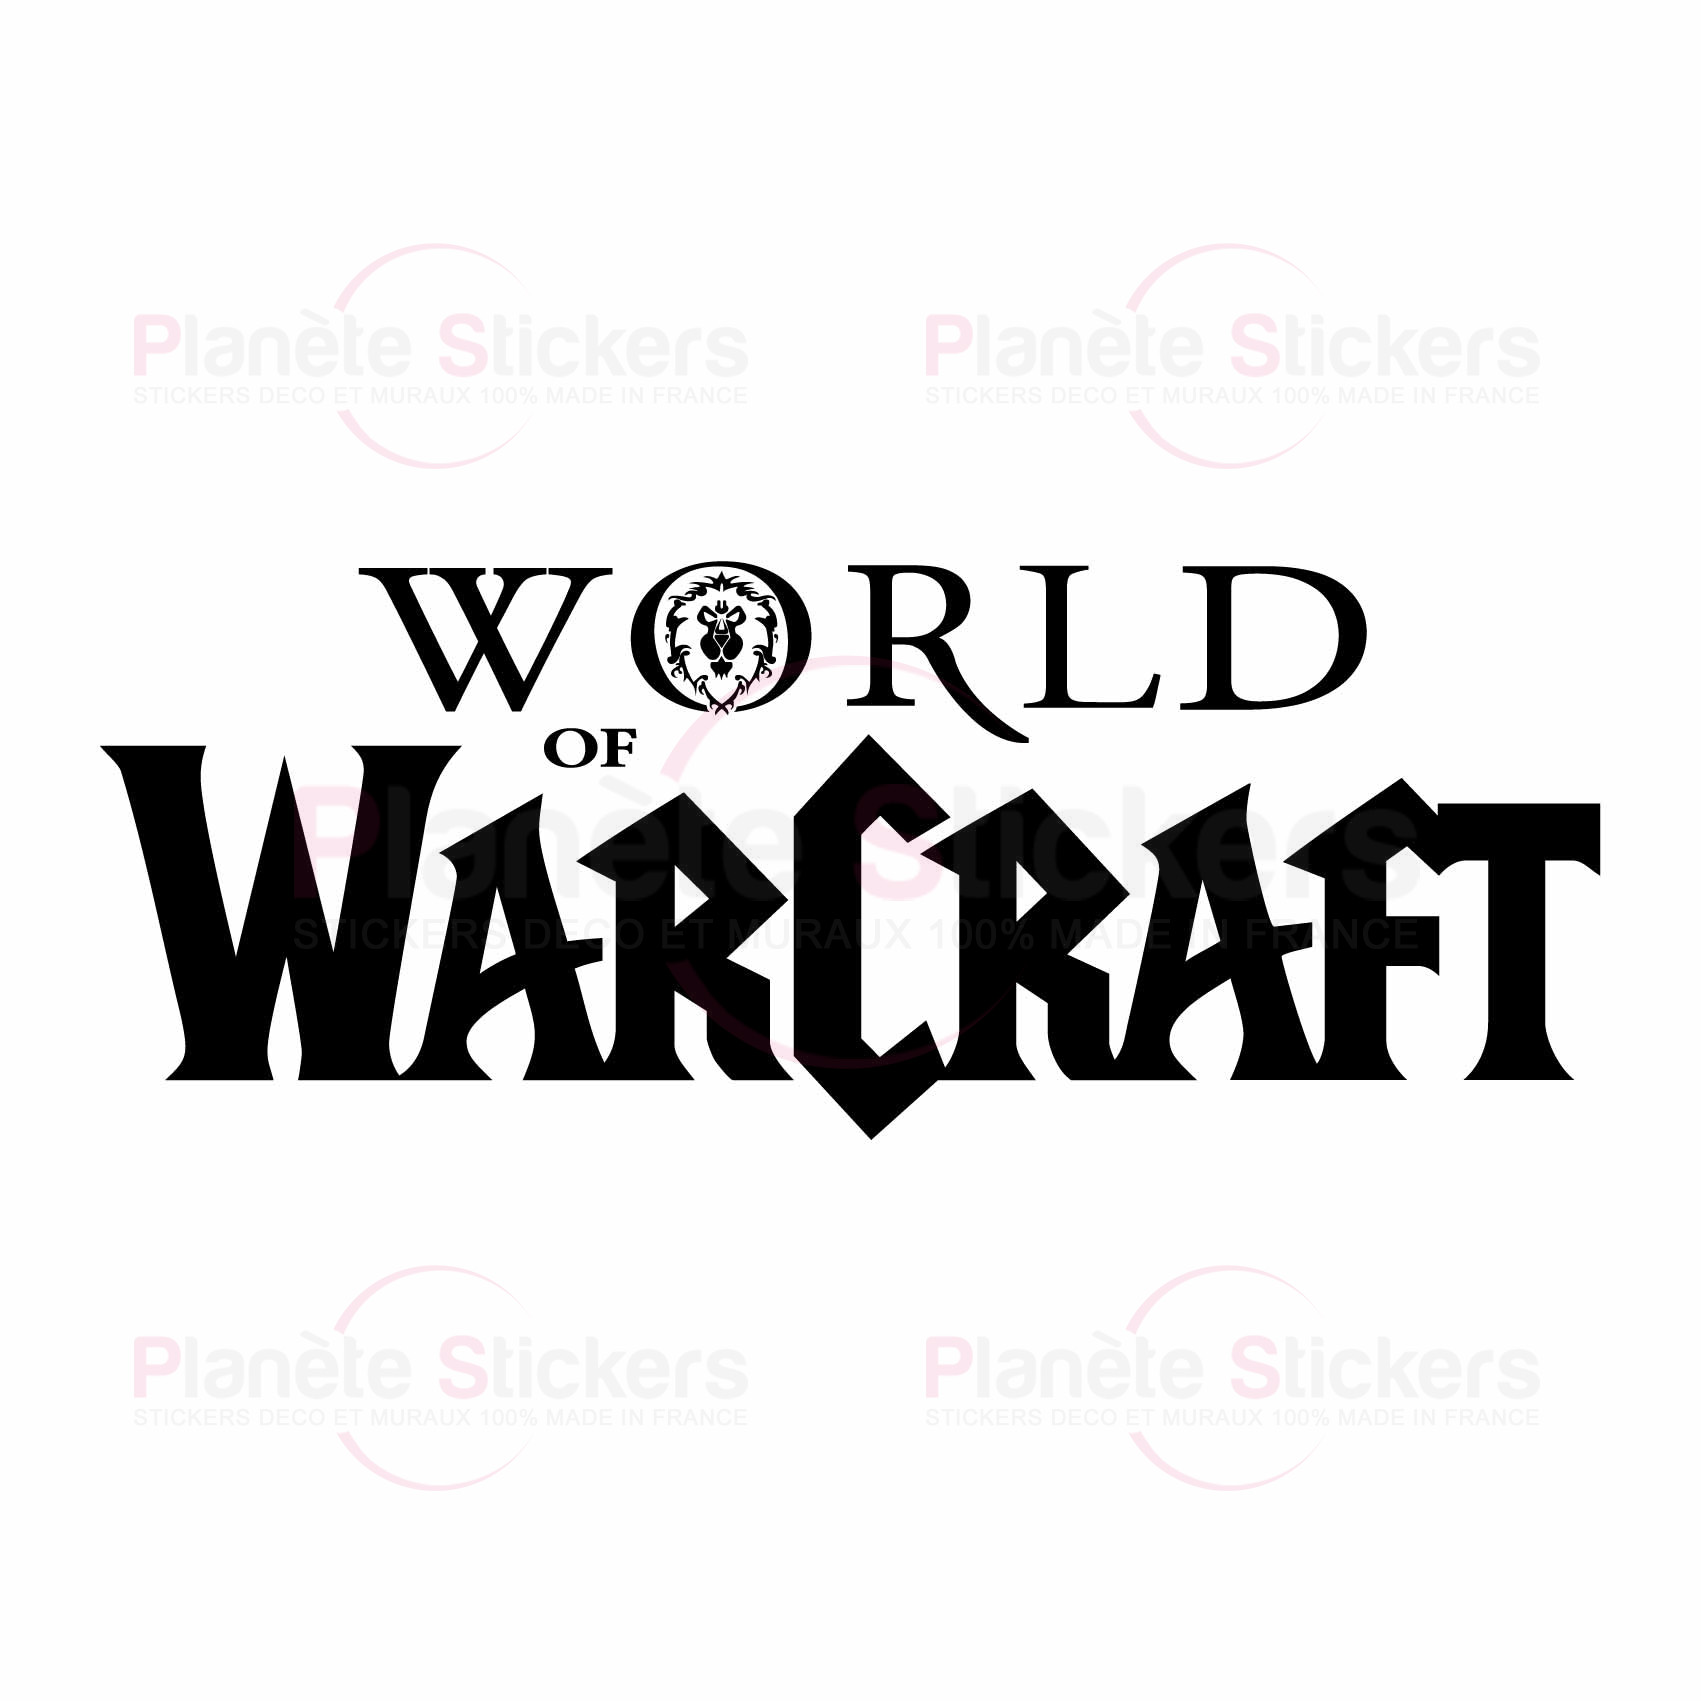 stickers-world-of-warcraft-alliance-ref4wow-stickers-muraux-world-of-warcraft-autocollant-mural-jeux-video-sticker-gamer-deco-gaming-salon-chambre-(2)